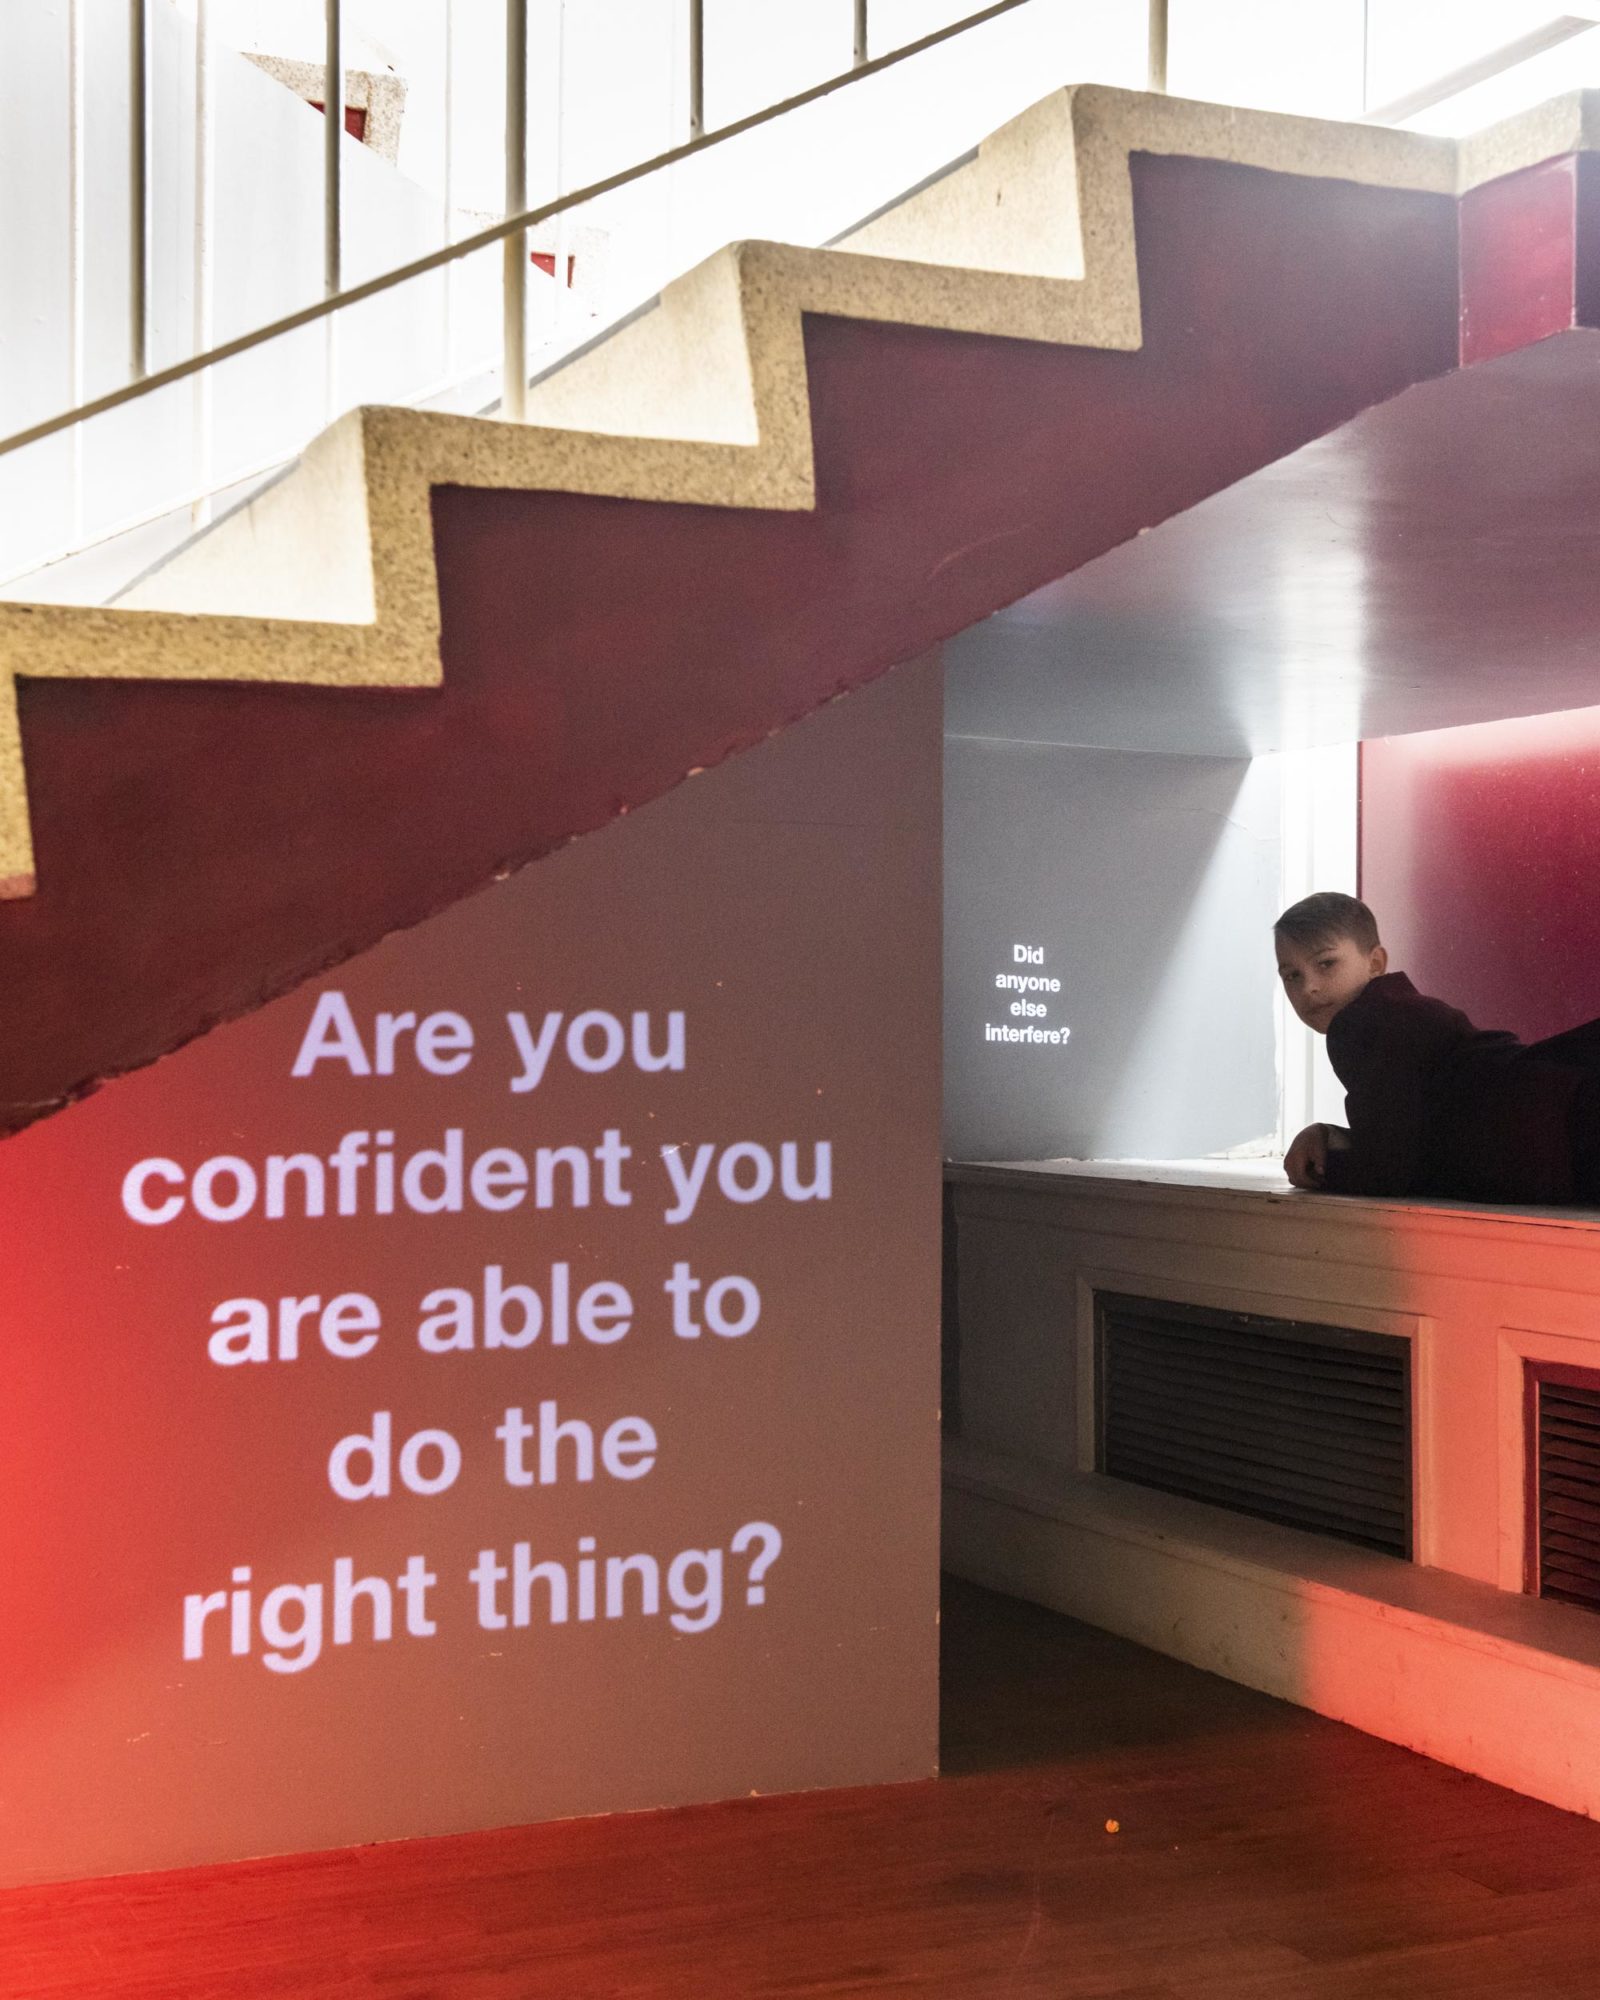 In a room with white walls, desk and stairs and a red carpet the words 'Are you confident you are able to do the right thing?' are projected on to a wall.